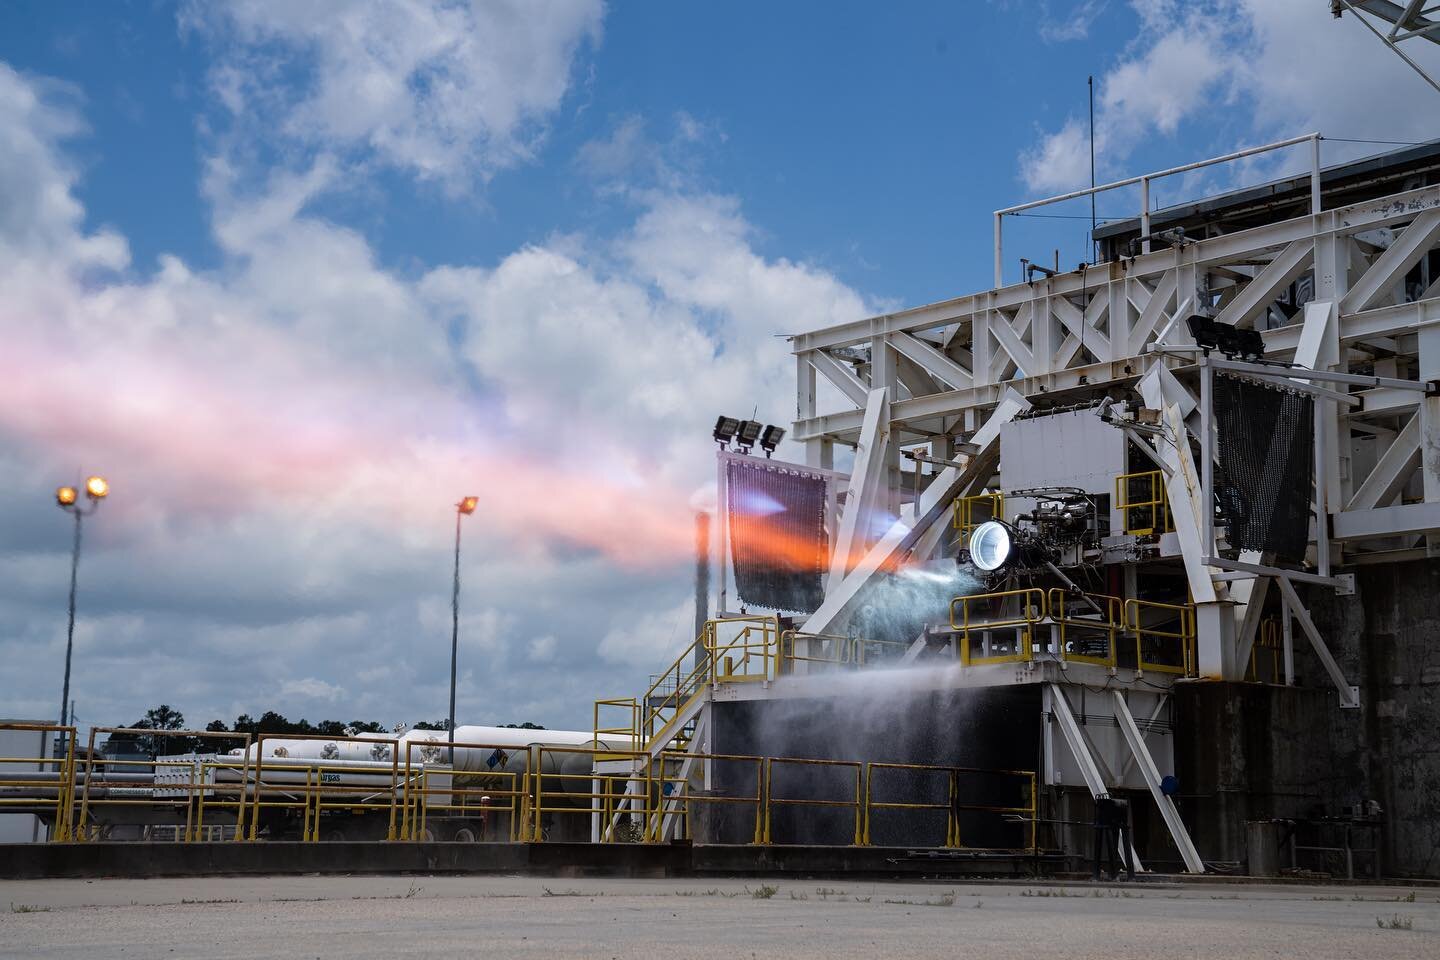 Aeon-R: &ldquo;Does my new skirt make my flames look fat?👗&rdquo;

Us: &ldquo;You look absolutely stunning.🔥&rdquo;

Over at @nasastennis we&rsquo;re testing a new article configuration for Aeon R this week, complete with a 3D printed nozzle skirt.